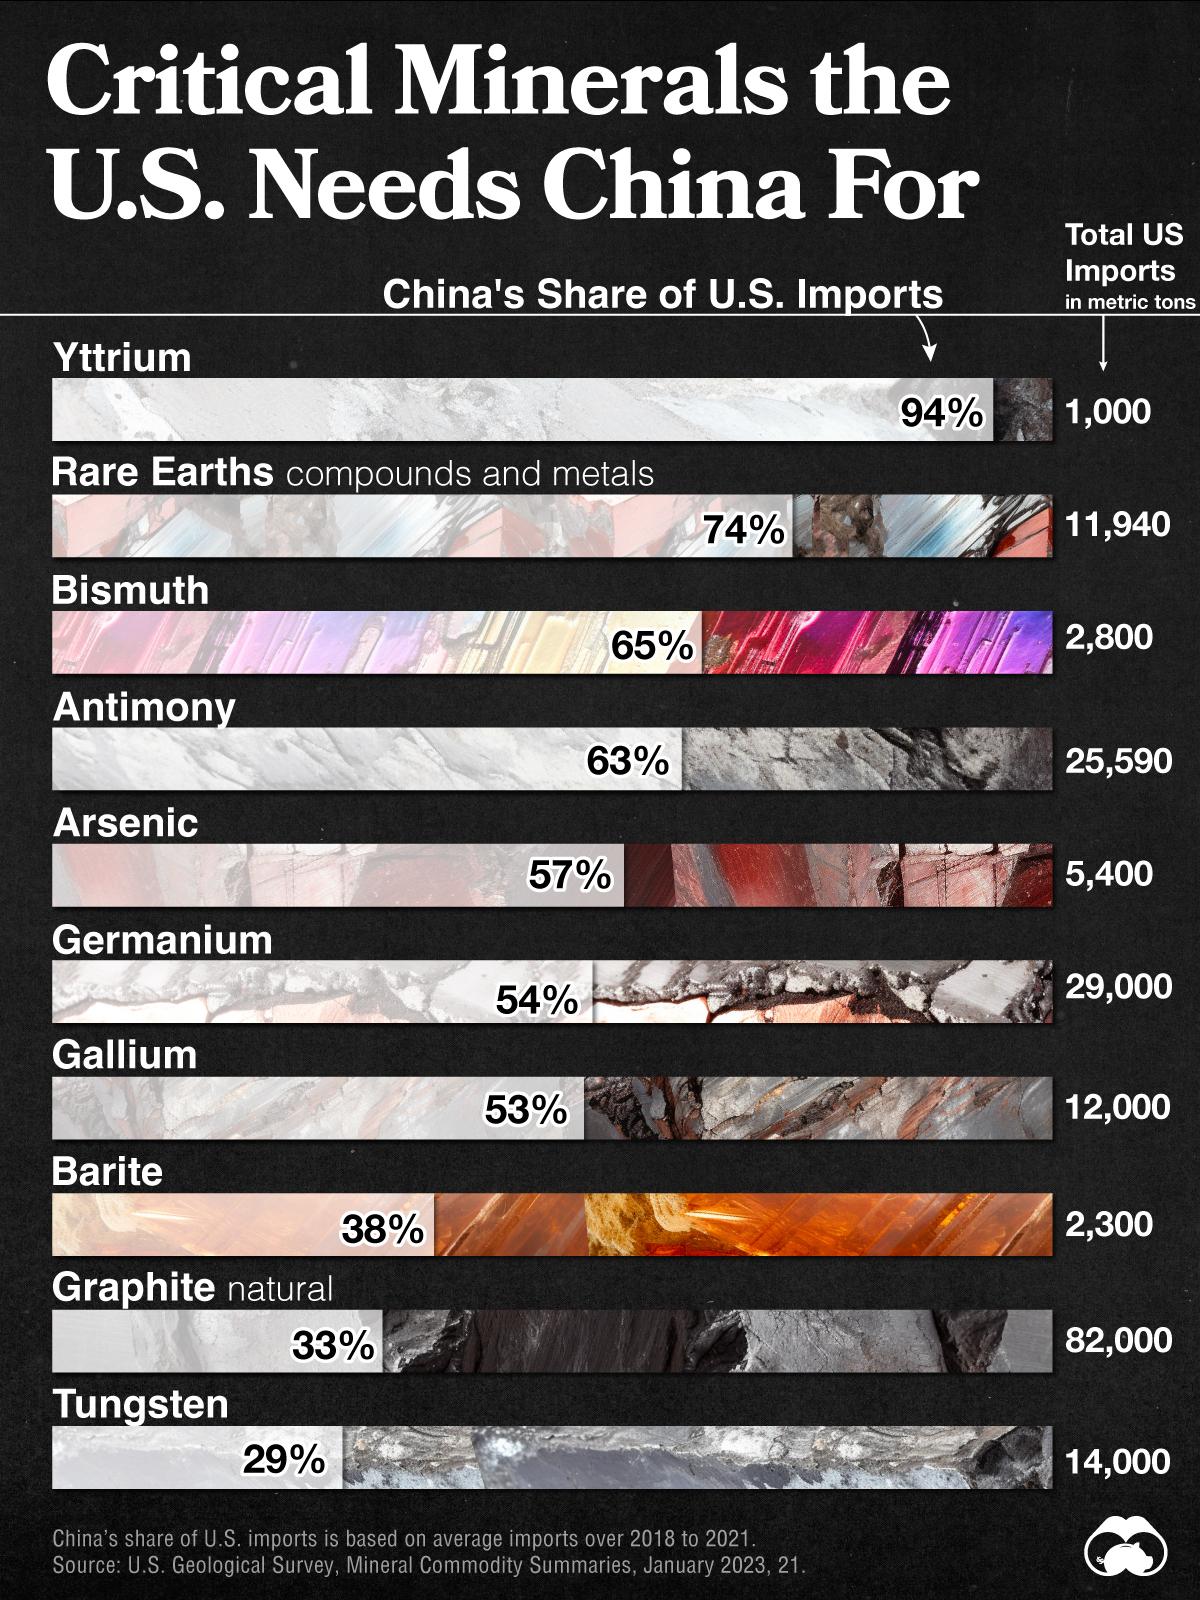 The U.S. Relies Heavily on China for These 10 Minerals ⛏️